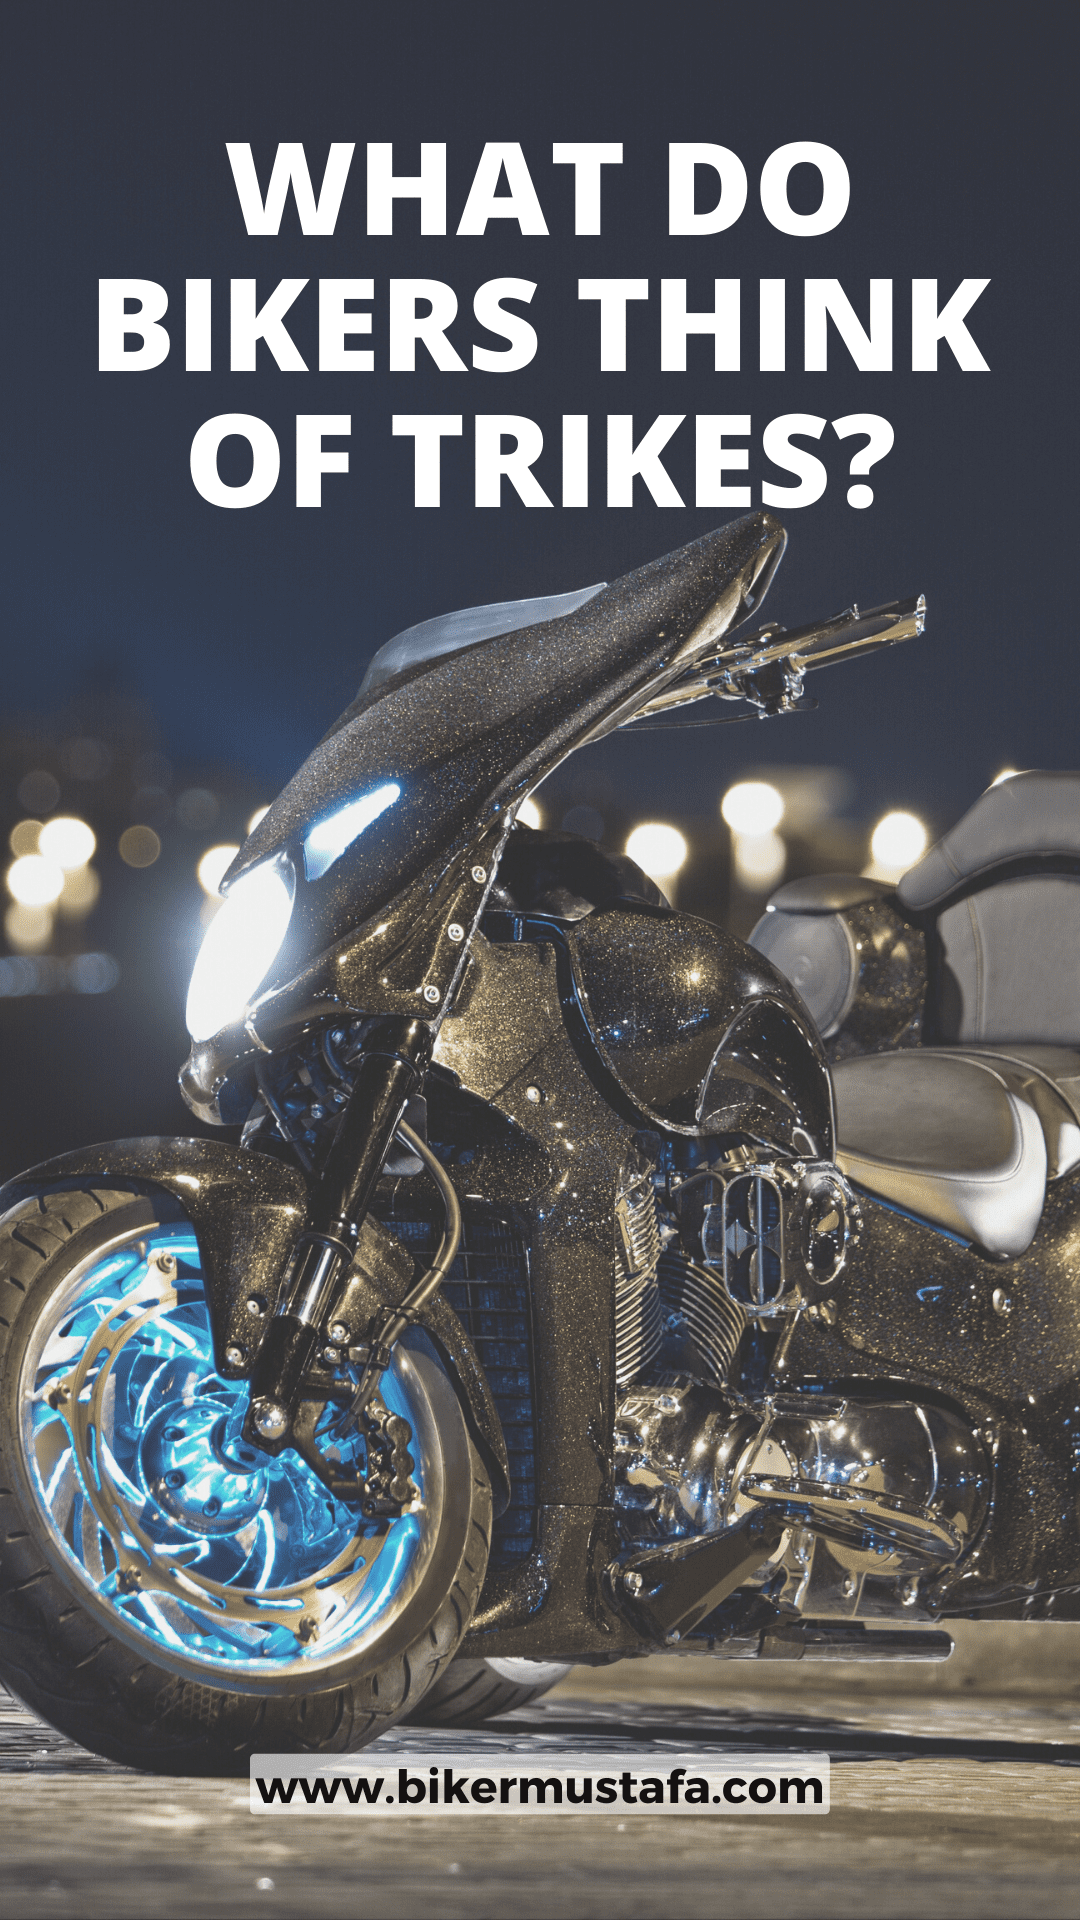 What Do Bikers Think Of Trikes?